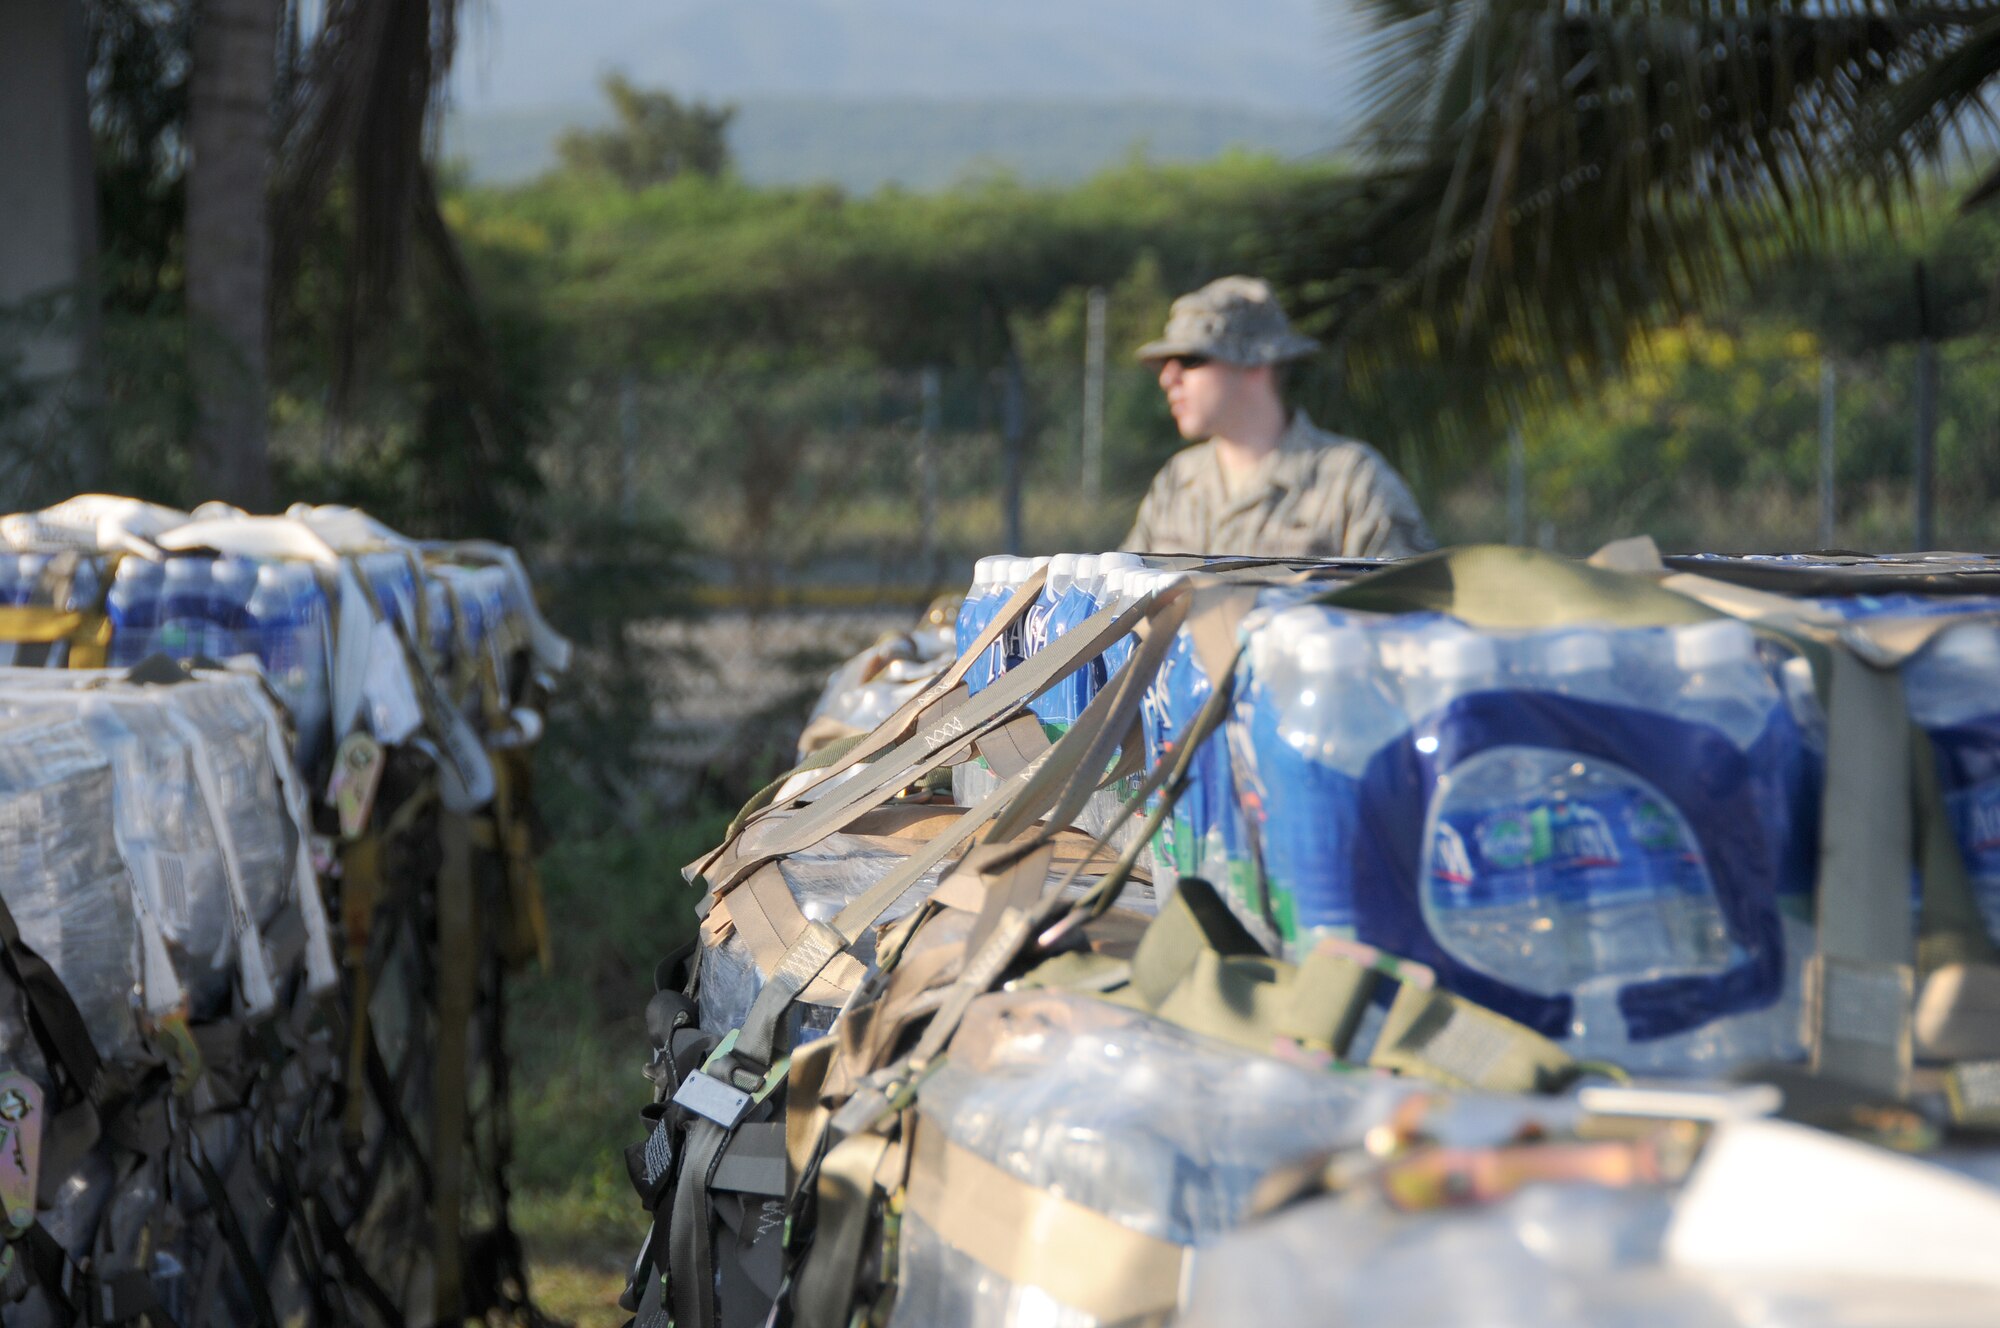 Tech. Sgt. Matthew Skeens from the Kentucky National Guard?s 123rd Contingency Response Group conducts an inventory of water at an air hub in Barahona, Dominican Republic,  Jan. 24. The water is to be shipped to earthquake victims in Haiti. (U.S. Air Force photo by Tech. Sgt. Dennis Flora)
